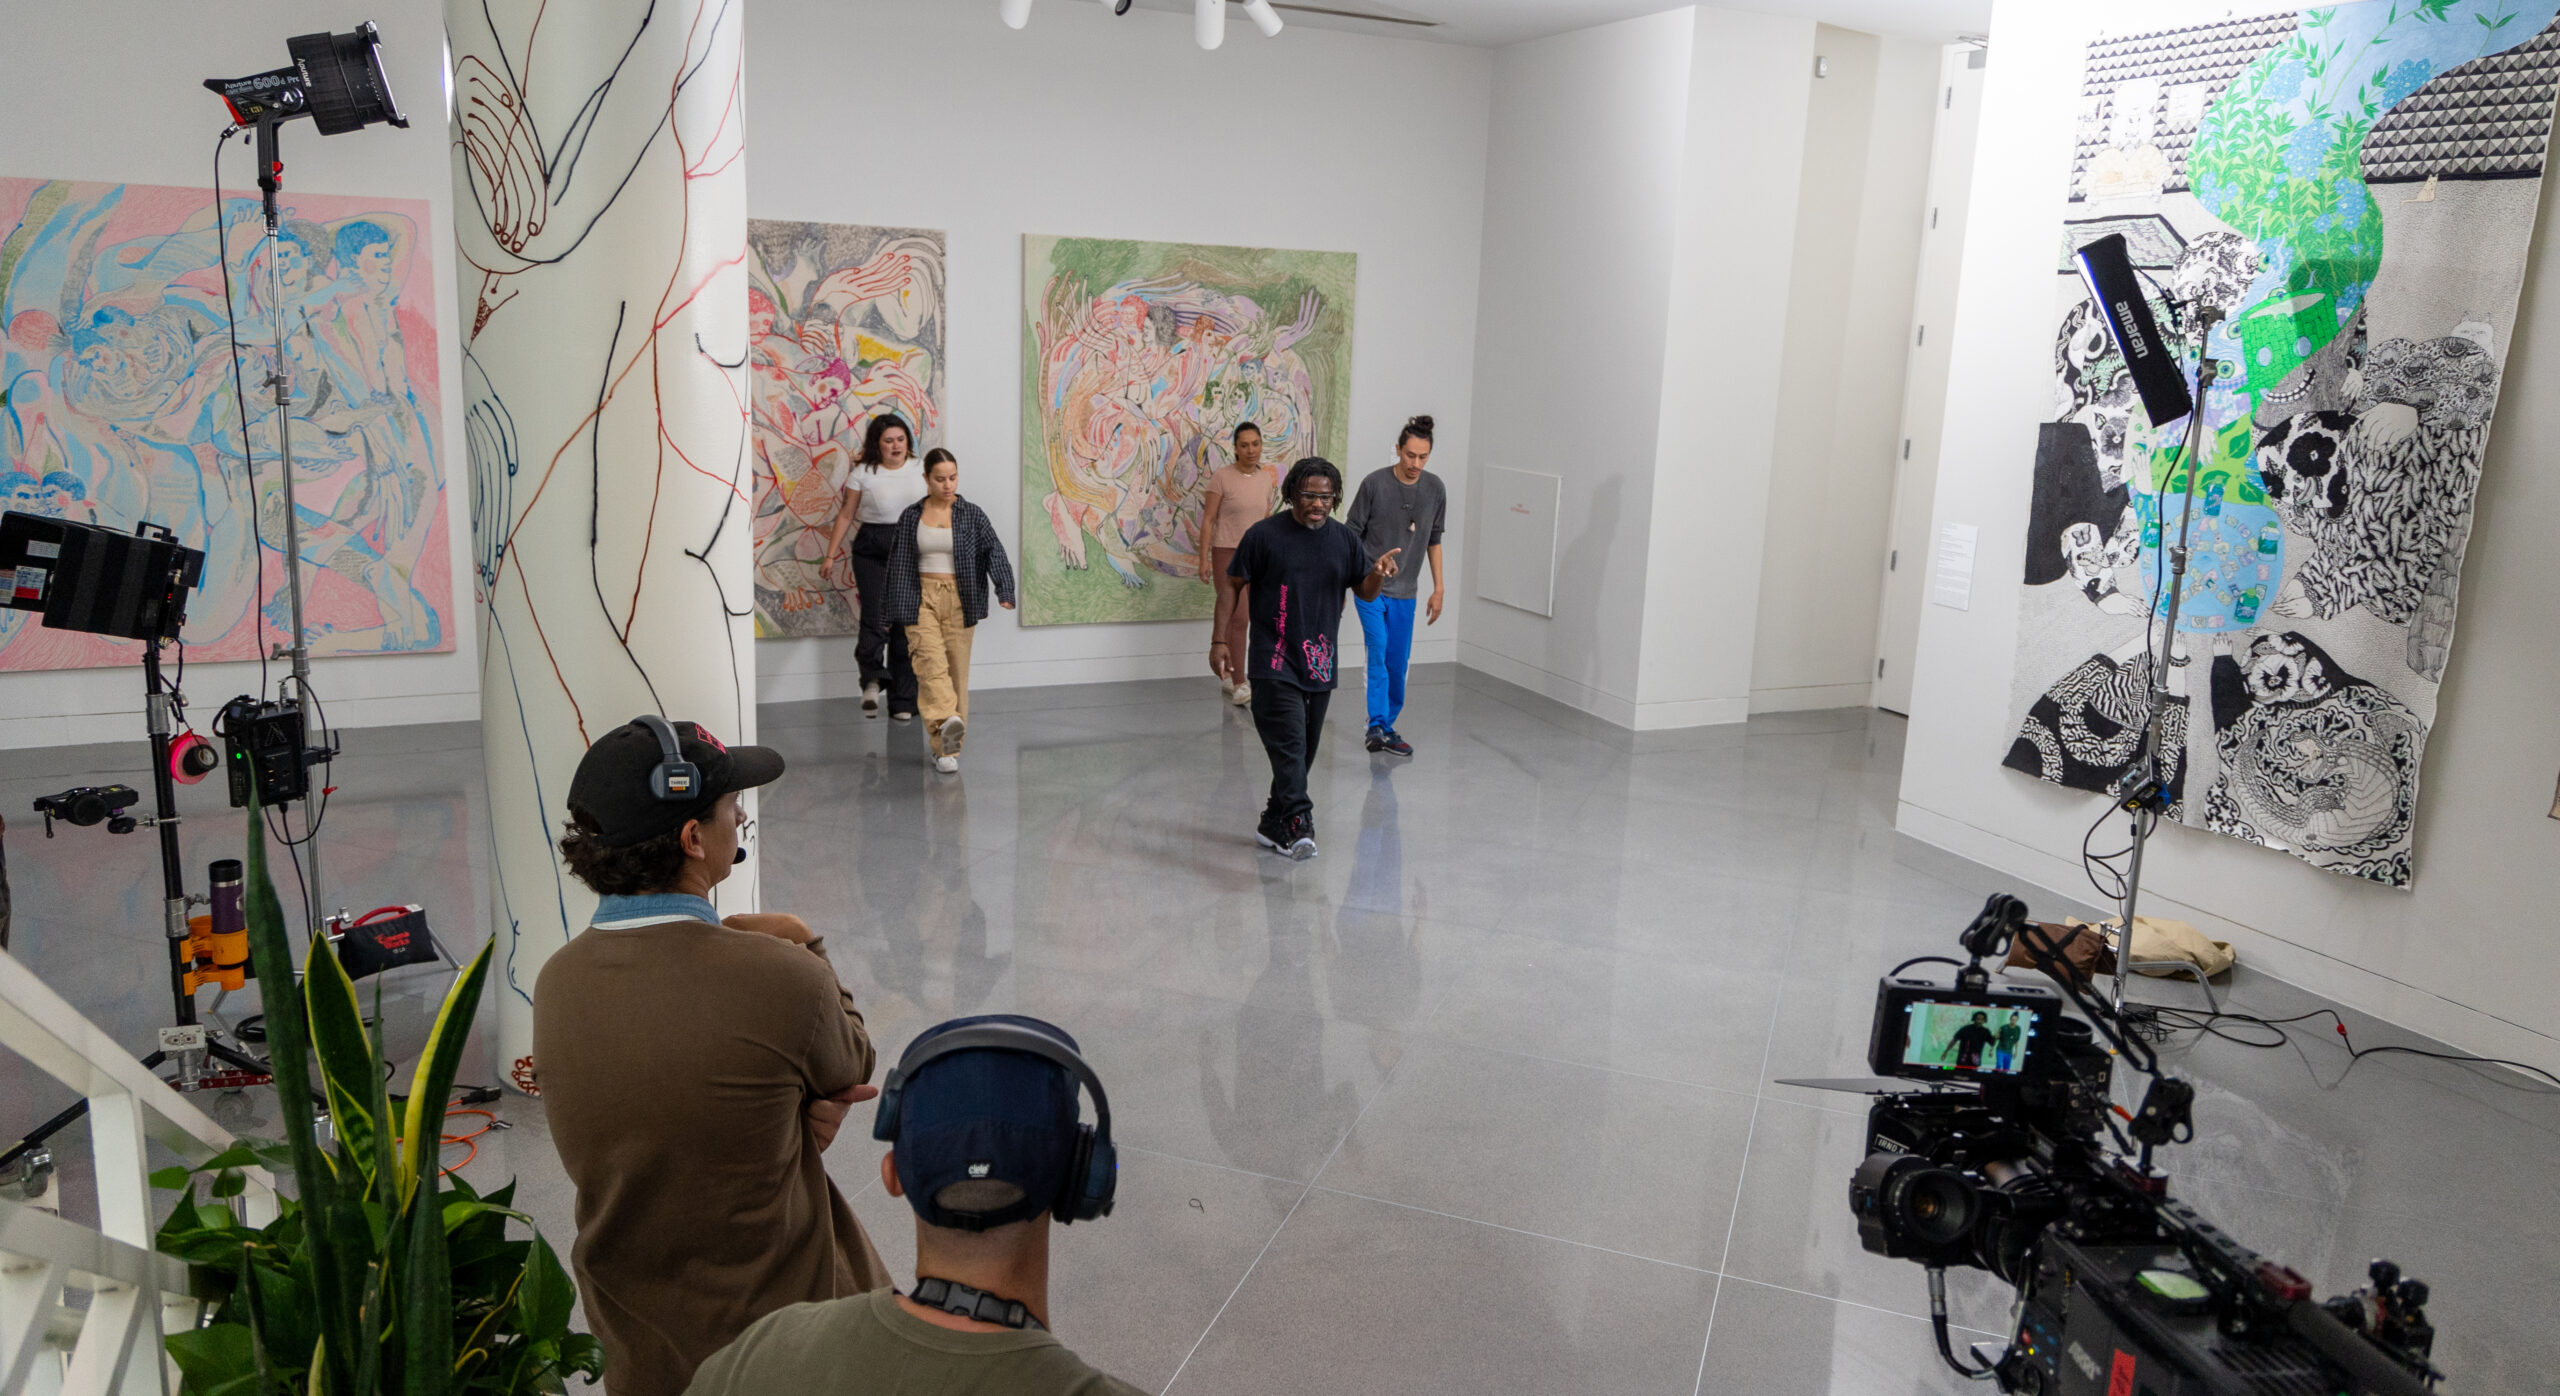 In a vibrant art gallery space, Evans—a dark-skinned man wearing a black t-shirt and black pants—demonstrates a dance move for a group of four teenaged students. In the foreground, the camera crew filming the process is visible.